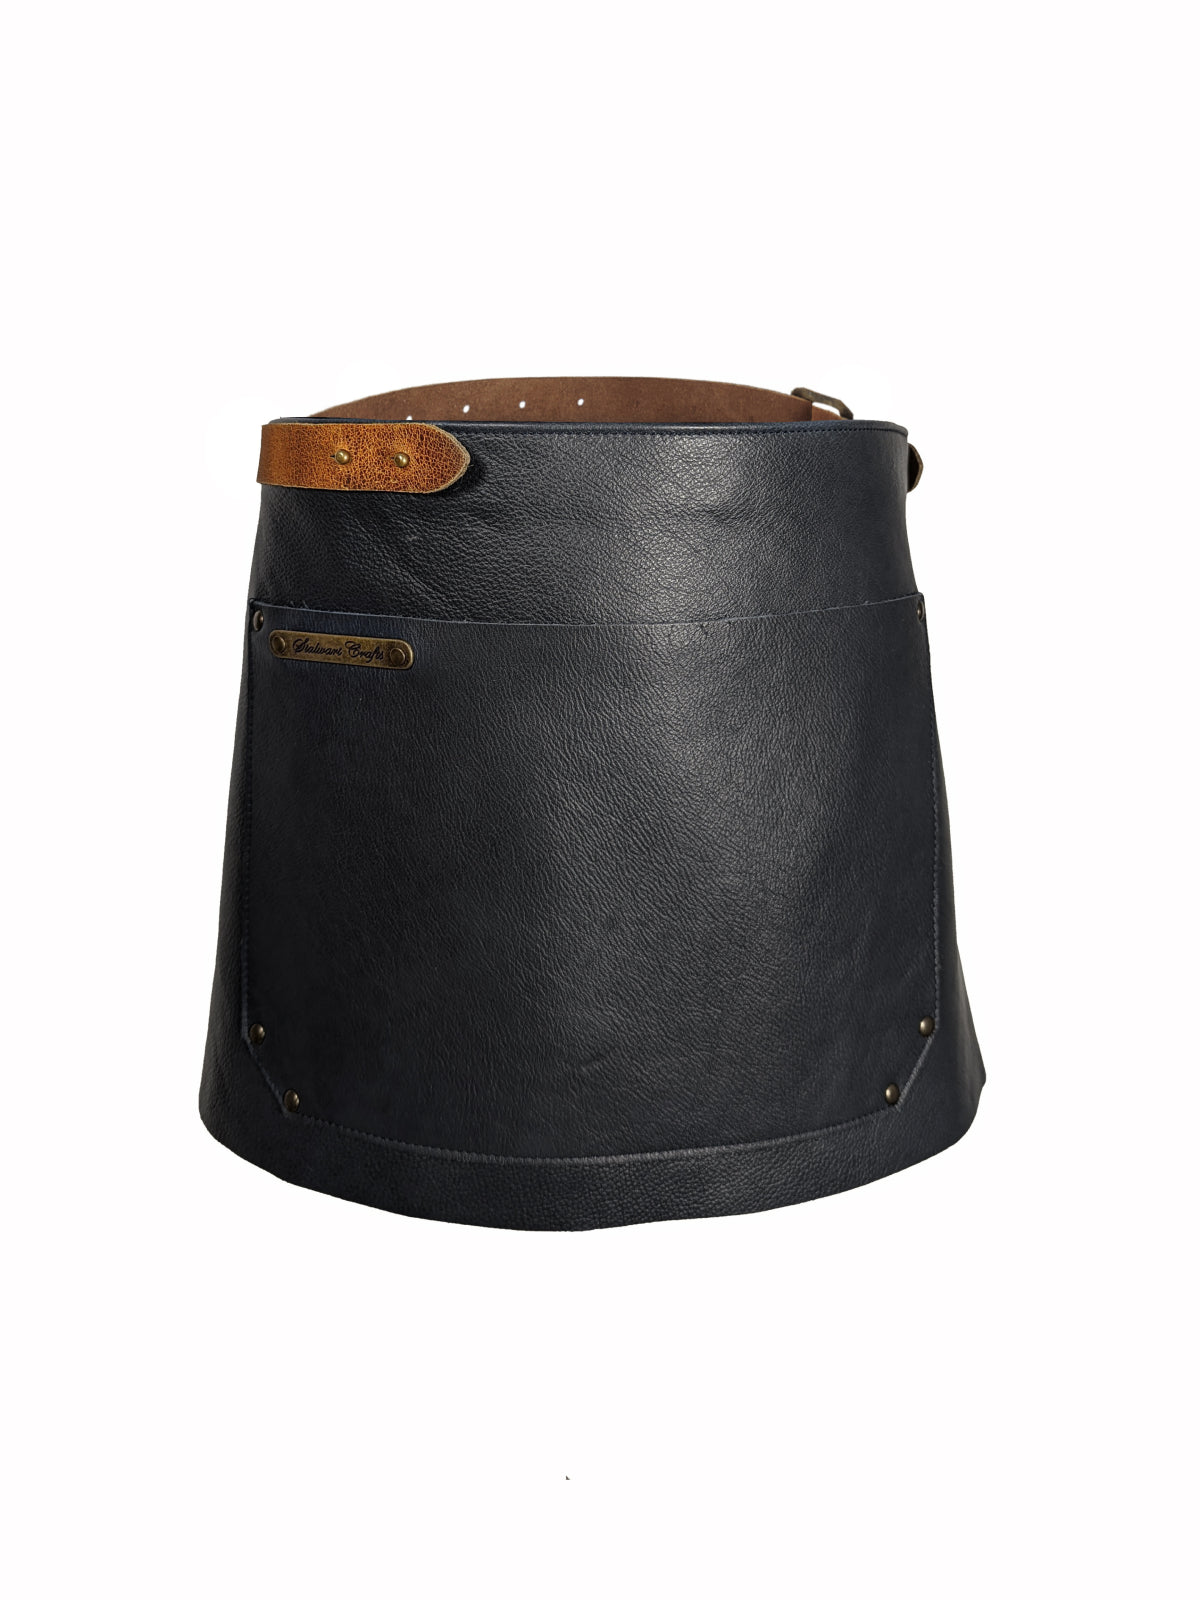 Leather Waist Apron Deluxe Black by STW -  ChefsCotton